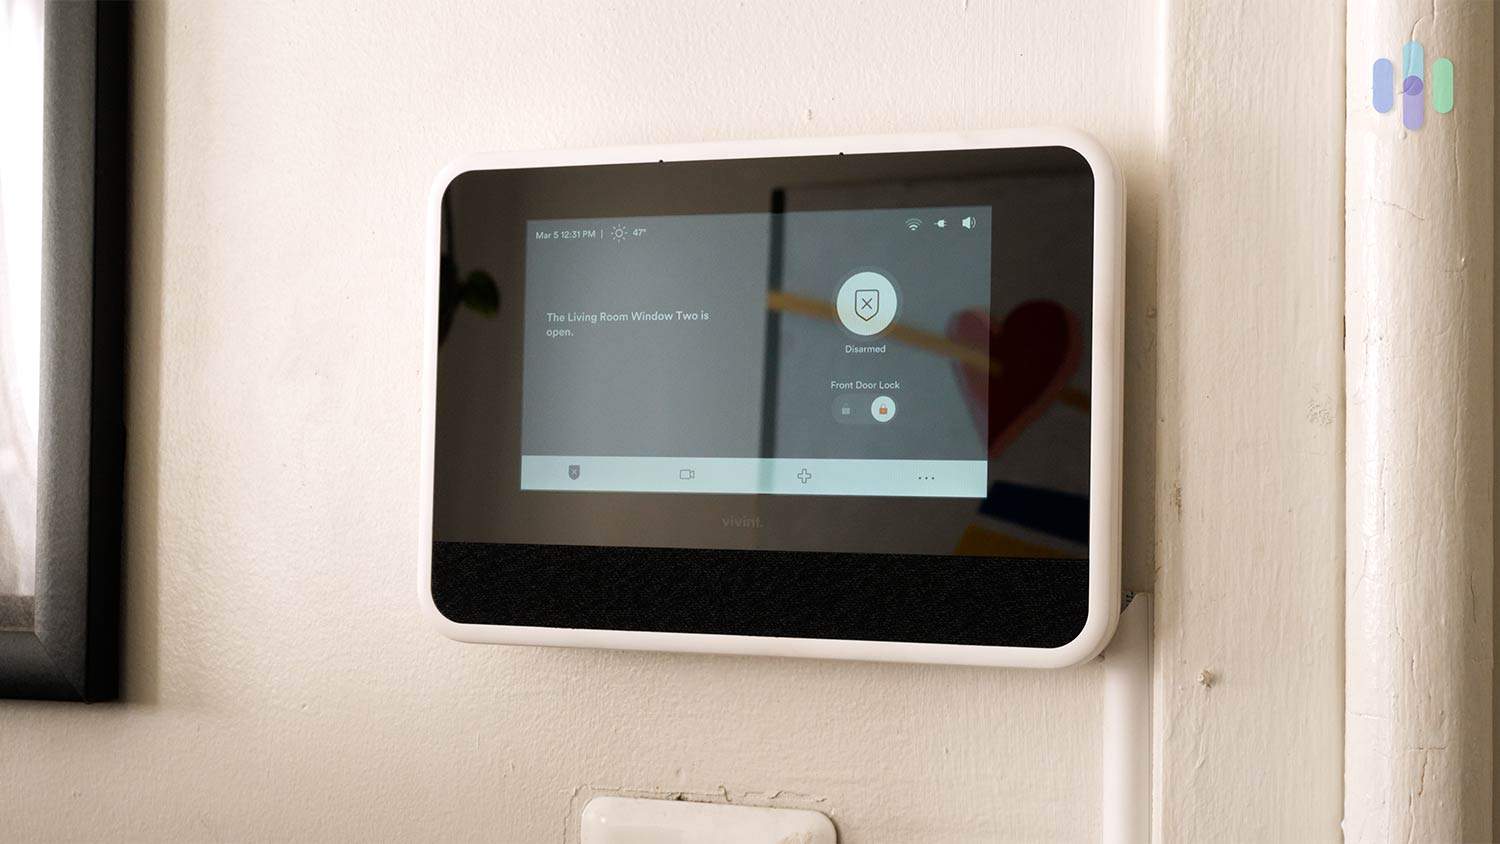 How Much Is Vivint Smart Home